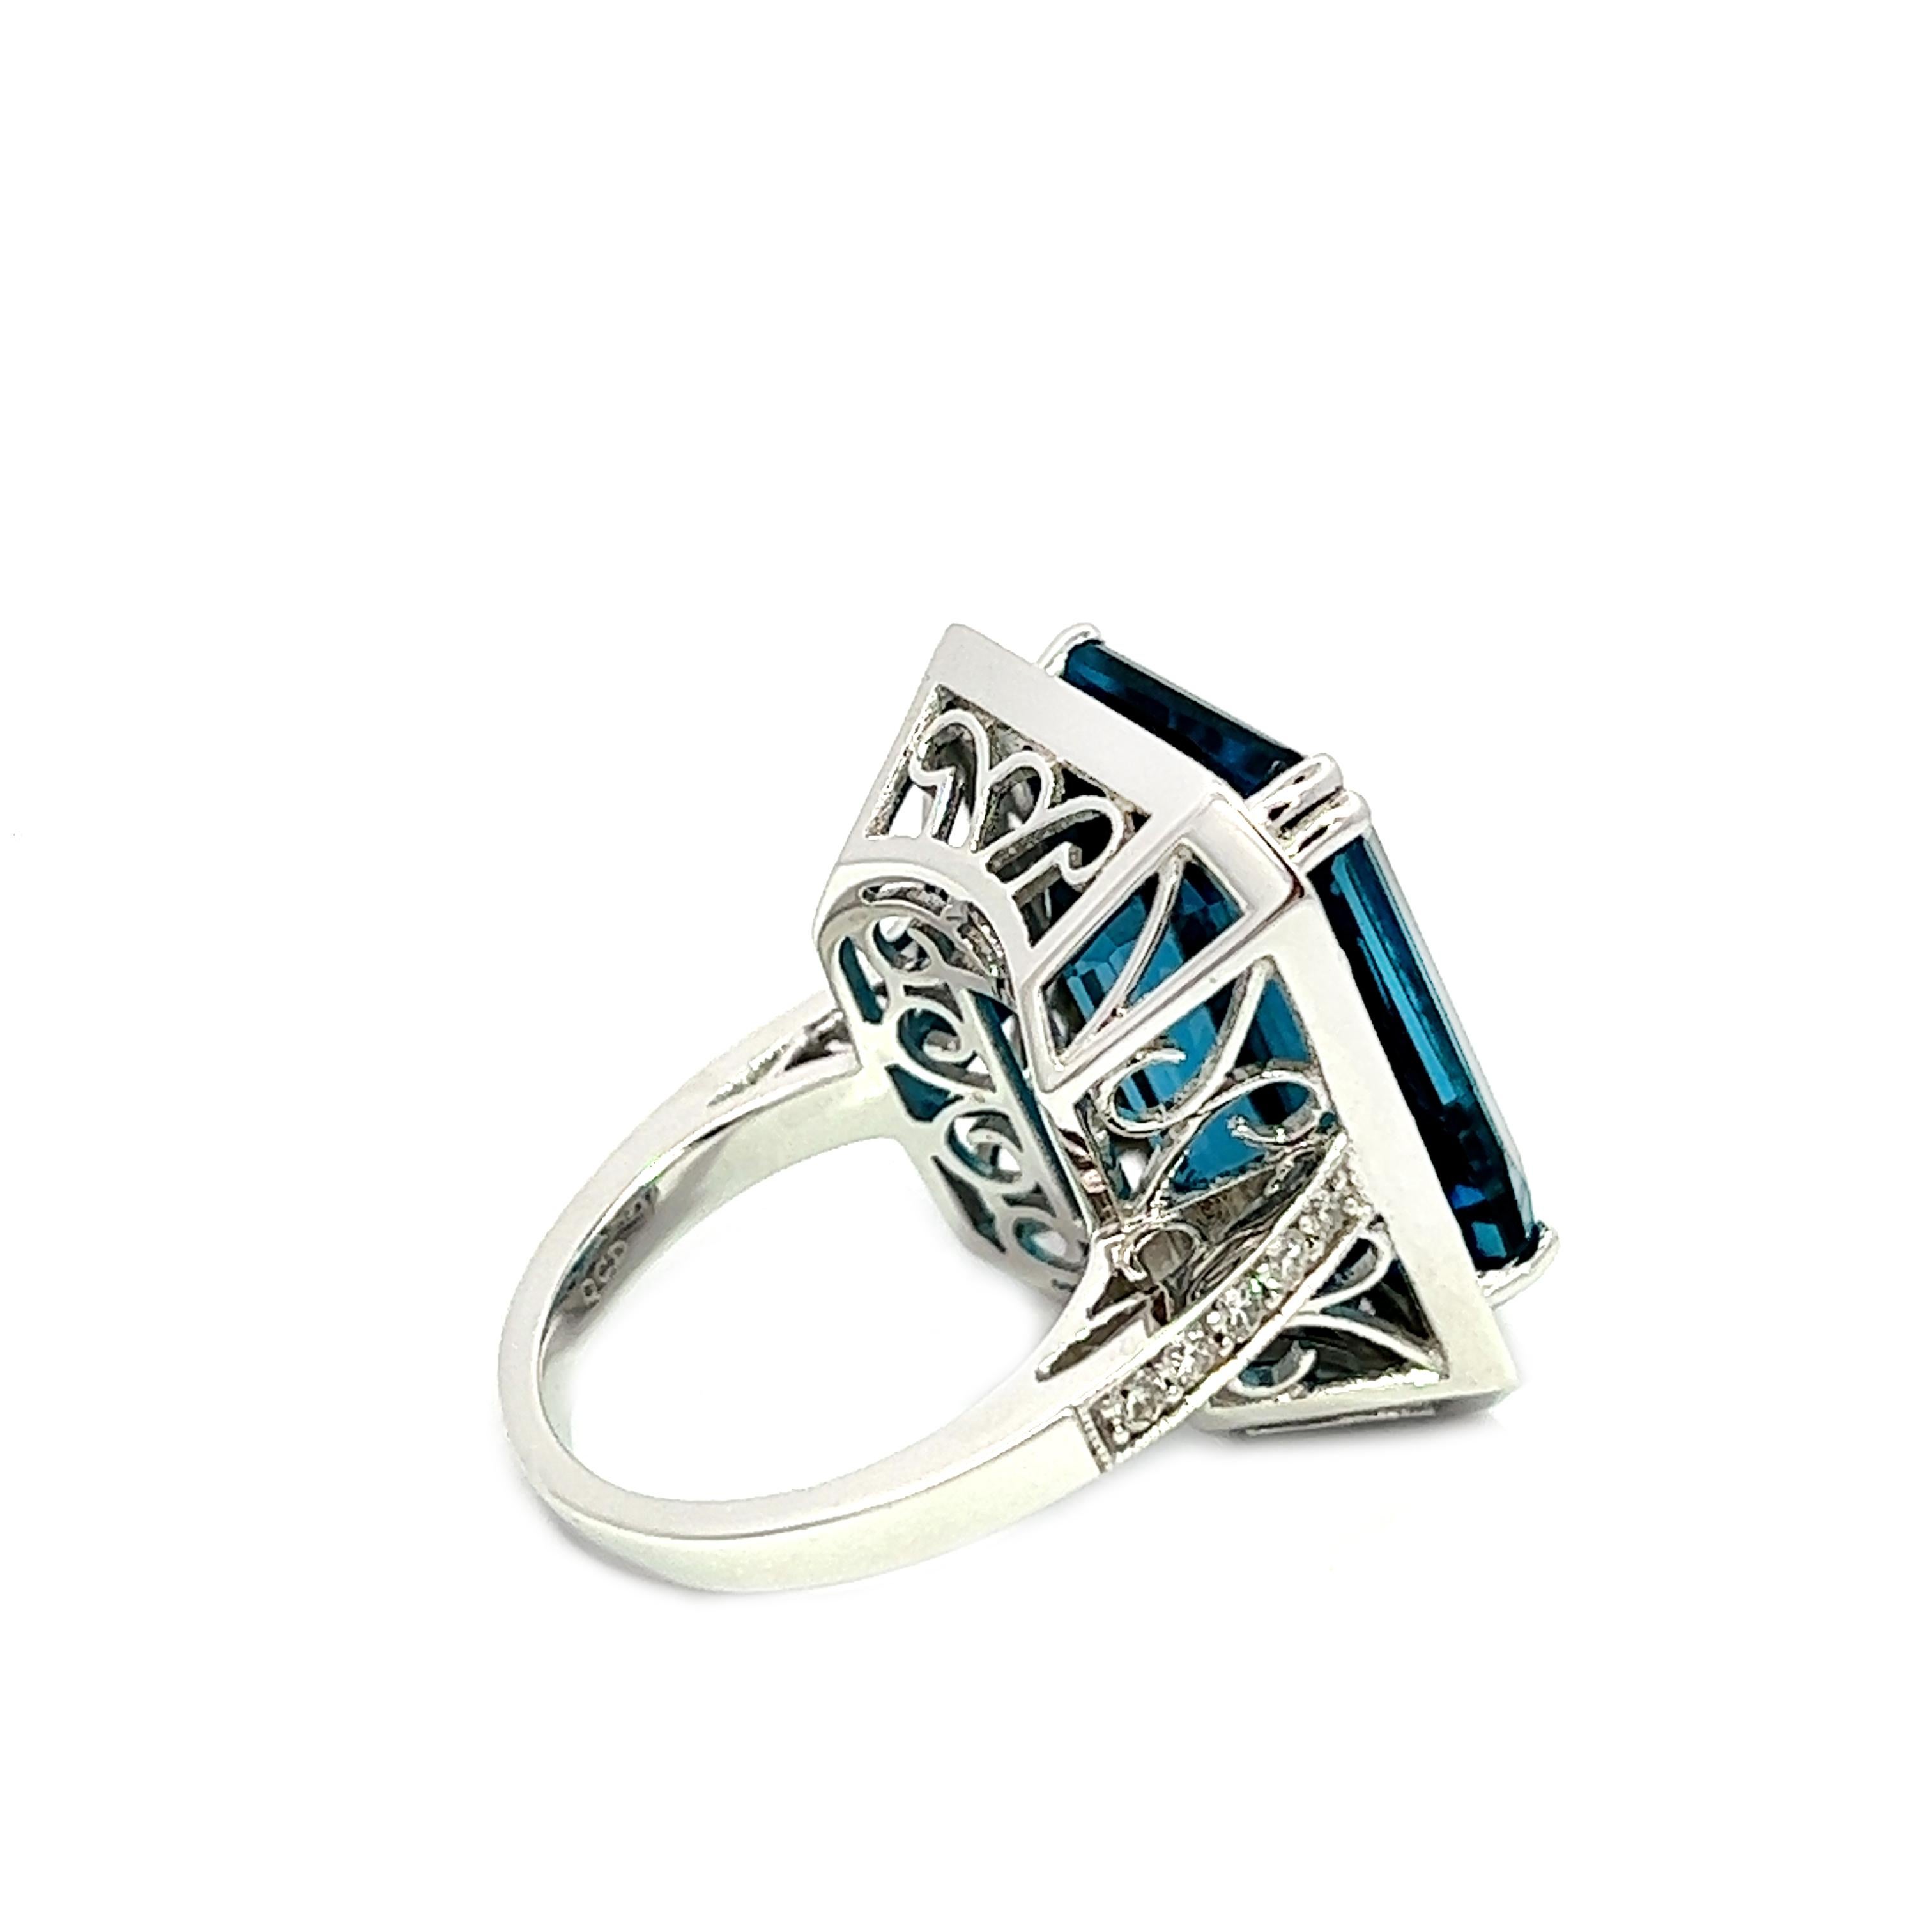 28.17CT Total Weight London Blue Topaz & Diamonds Ring, set in 14KW In New Condition For Sale In New York, NY